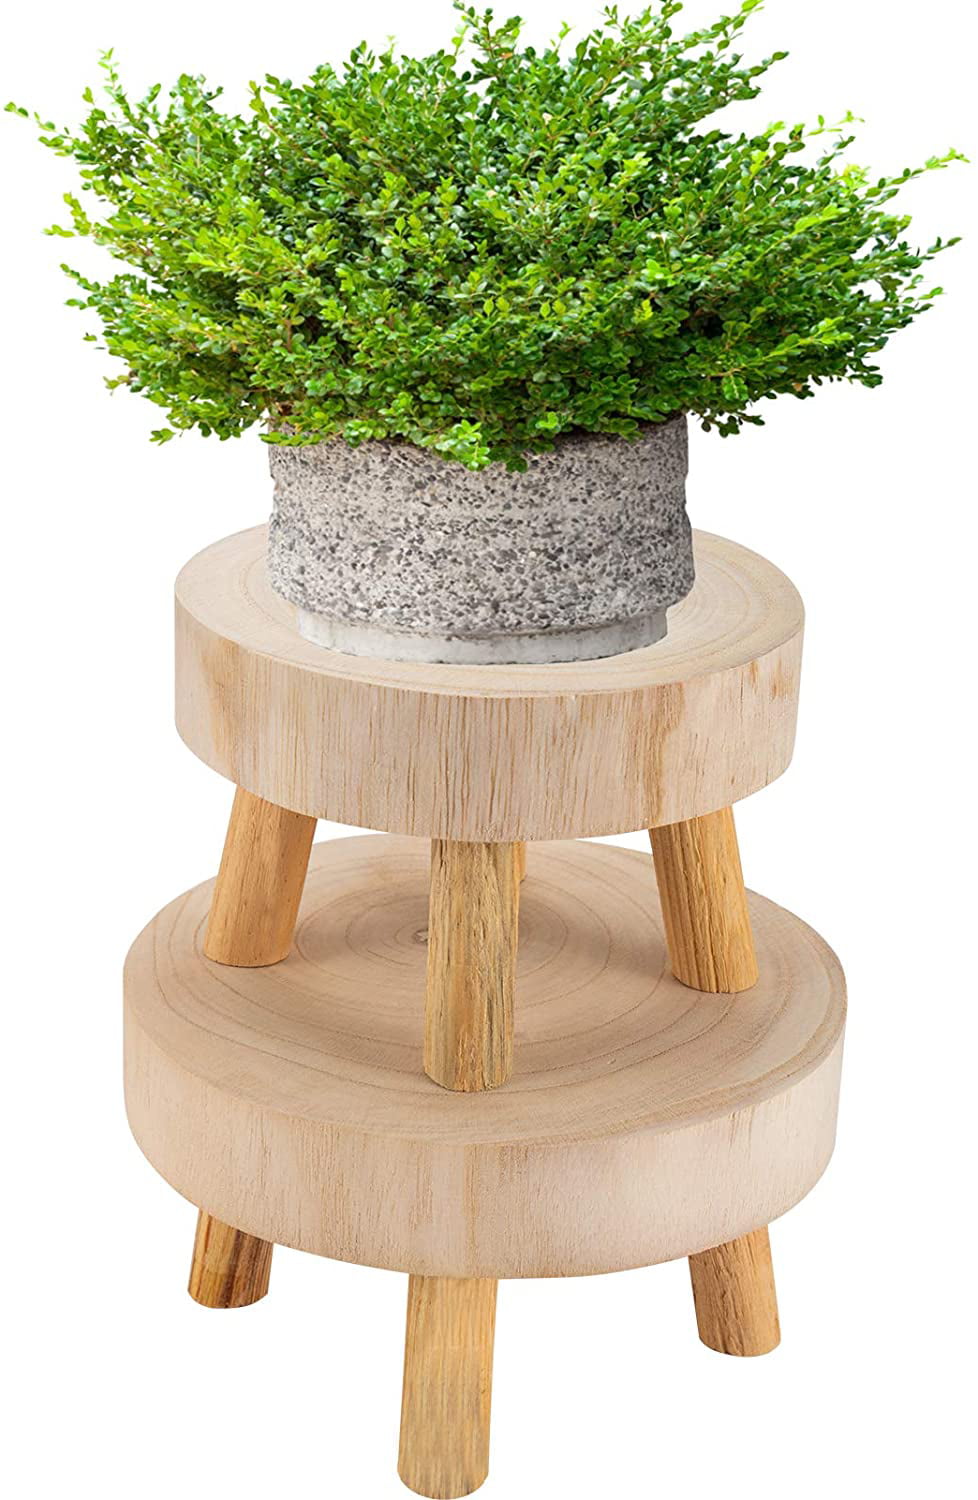 S, M Brown Flower Shelf Bonsai Rack Garden Plant Pot Riser Holder Round Decorative Plant Stand with Wood Grain for Indoor Outdoor Home Patio Decoration Pack of 2 Mini Wooden Stool Display Stand 